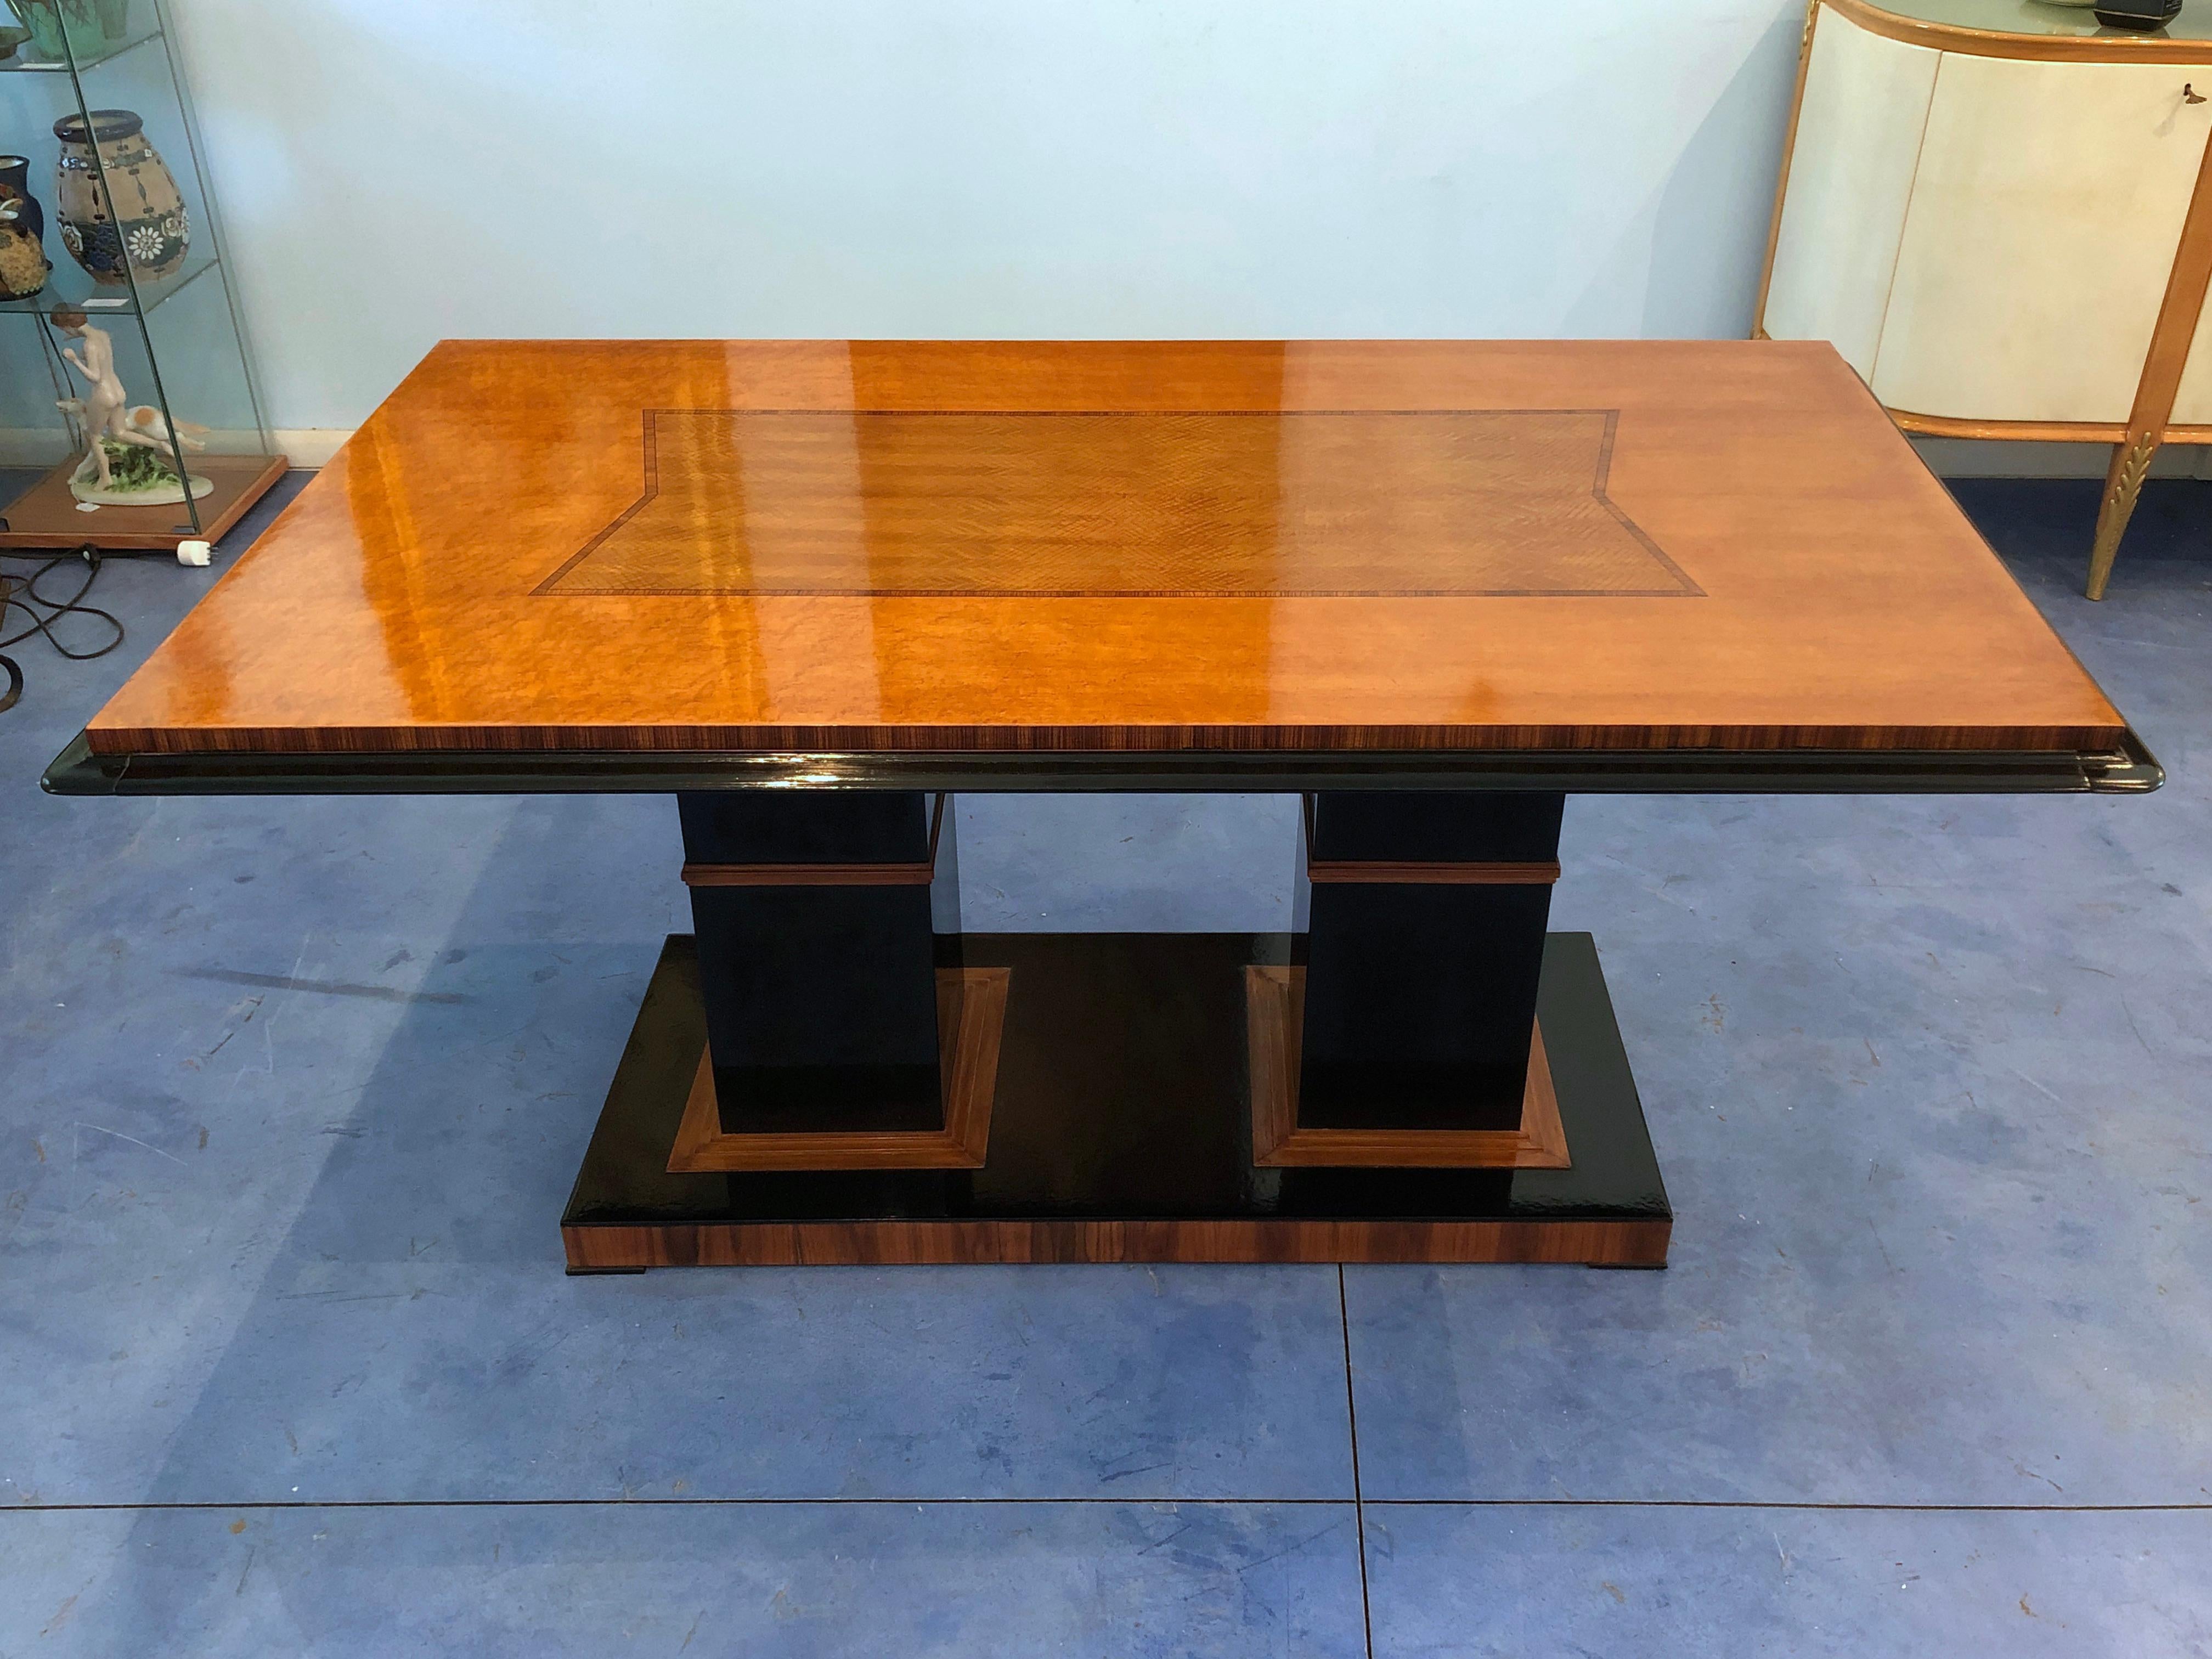 Rare Art Deco table in a rationalist style, maple top with a central decoration, black lacquered wood base and on the sides. Extendible at the ends.